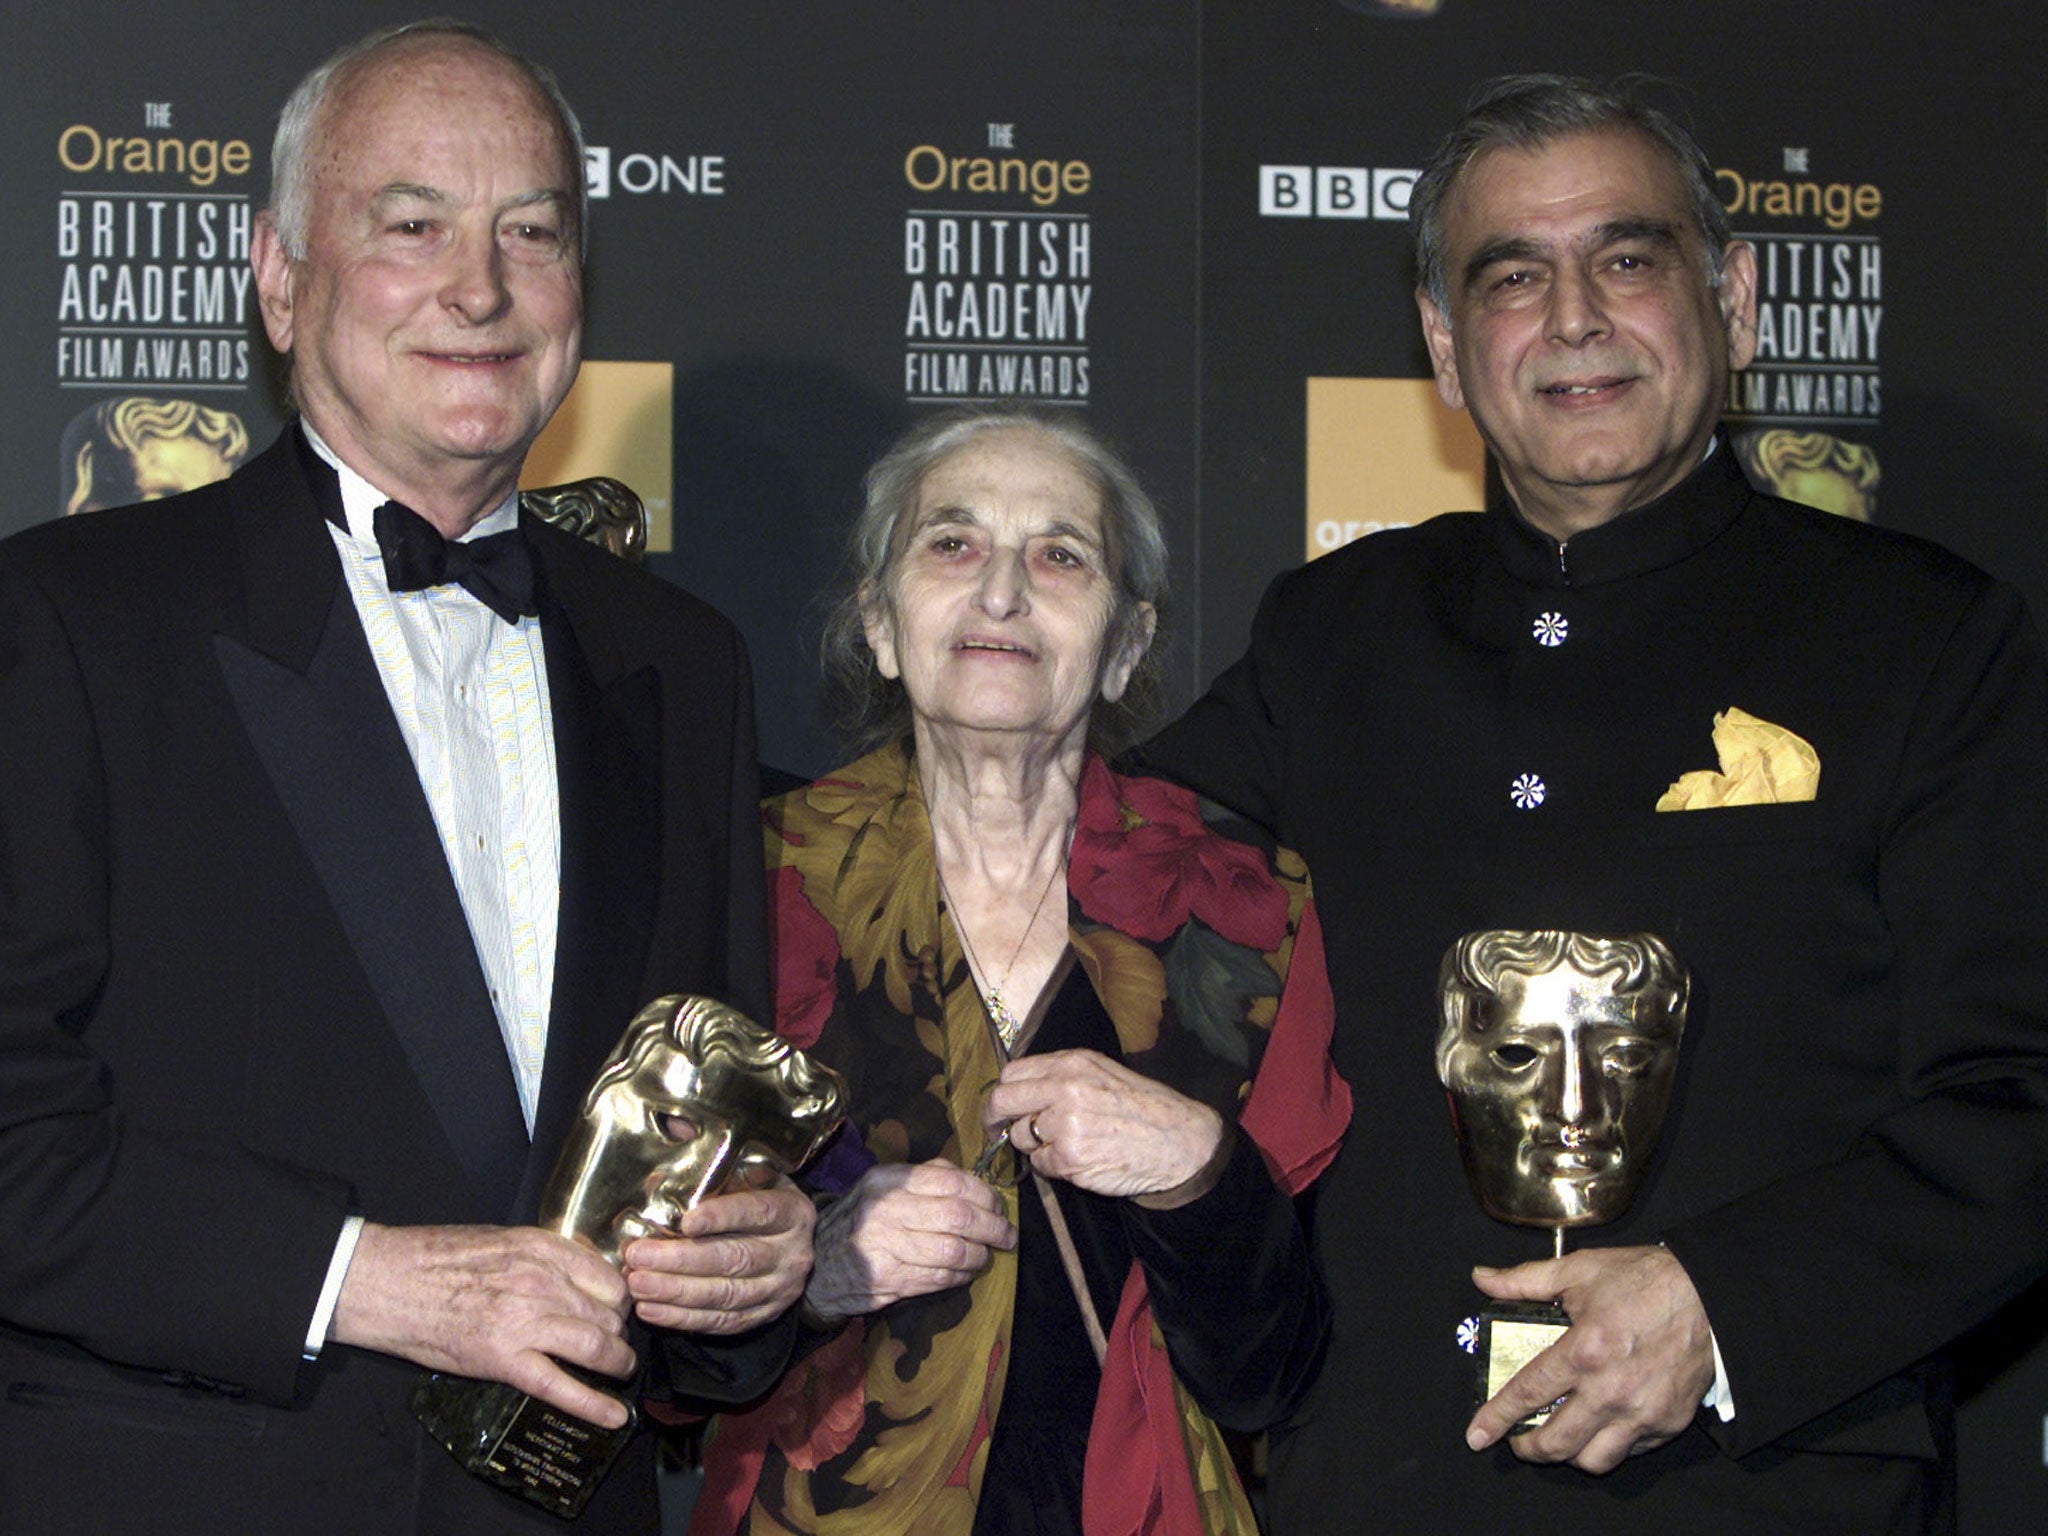 Ruth Prawer Jhabvala: Author and screenwriter who won both an Oscar and the Booker Prize